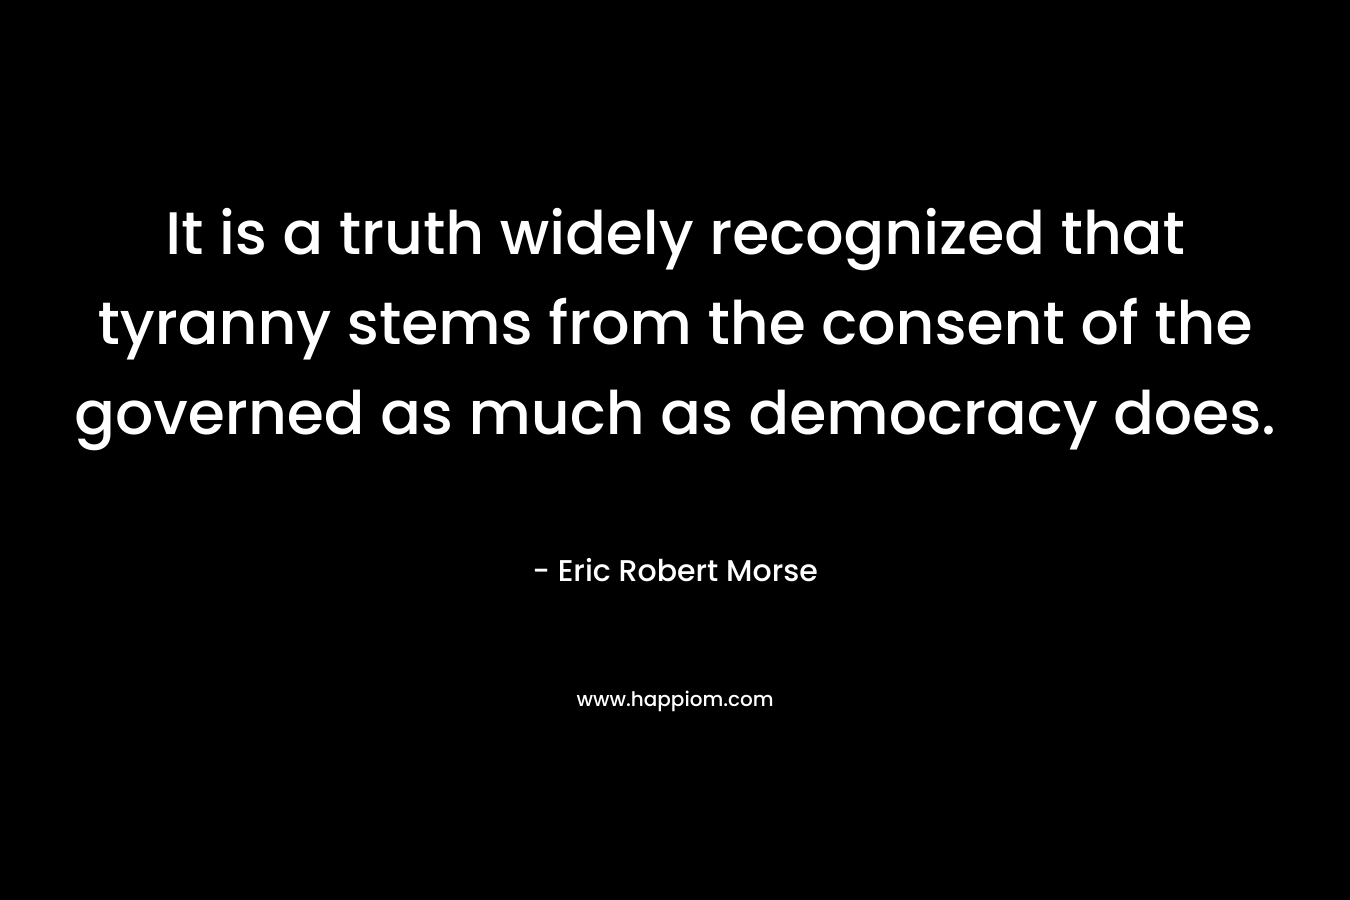 It is a truth widely recognized that tyranny stems from the consent of the governed as much as democracy does. – Eric Robert Morse